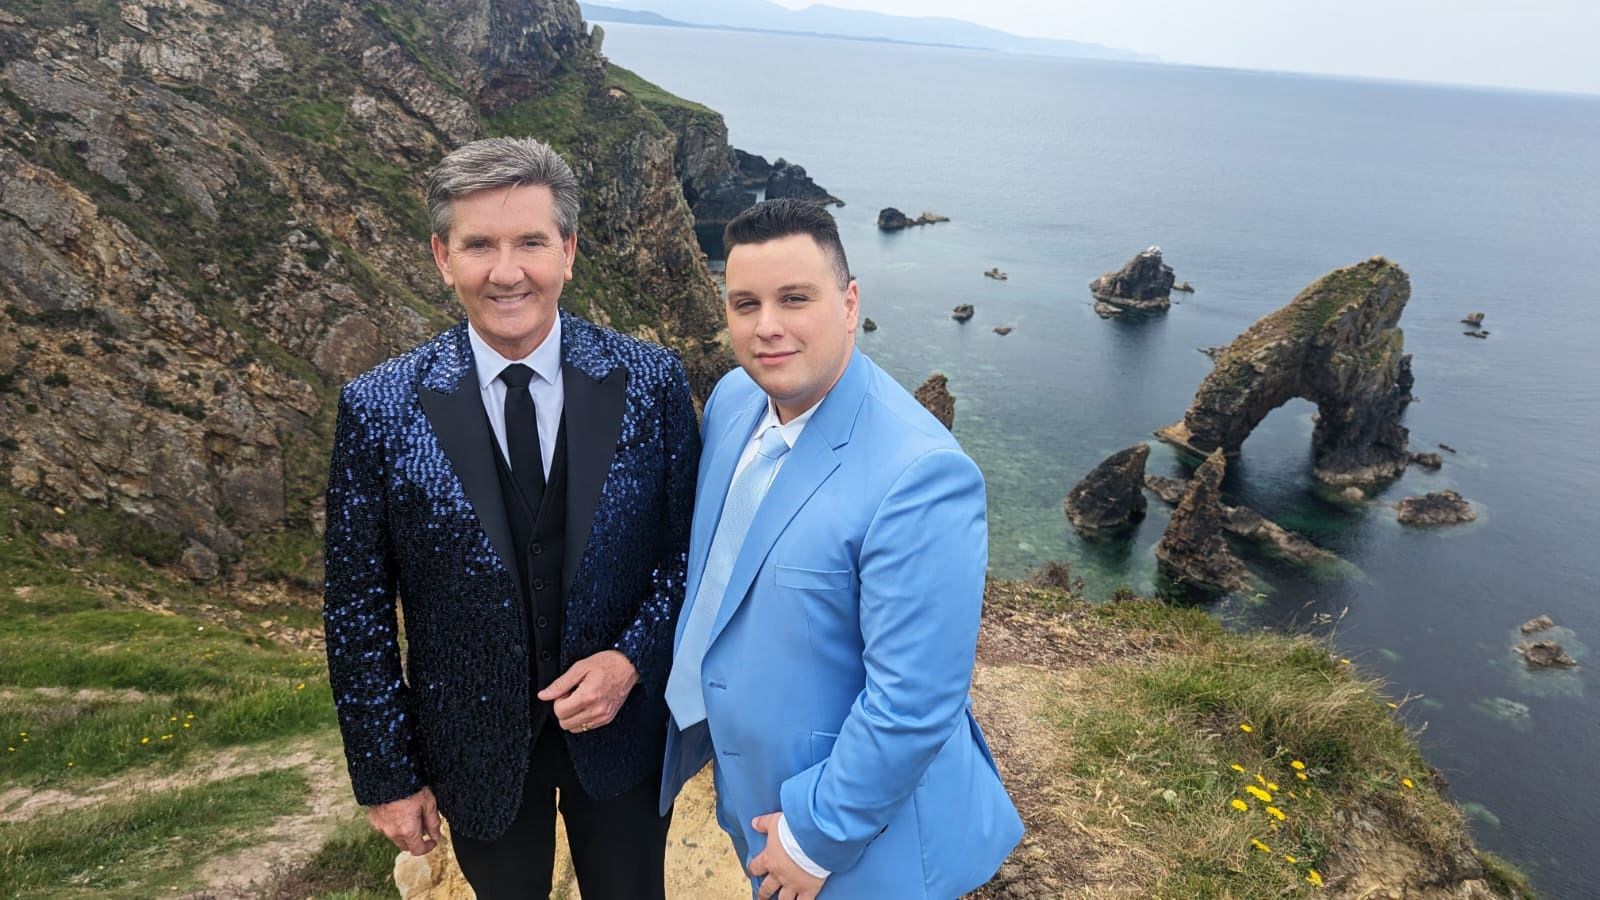 Daniel O'Donnell and Brandon McPhee recorded their music video in the Dungloe area of County Donegal.